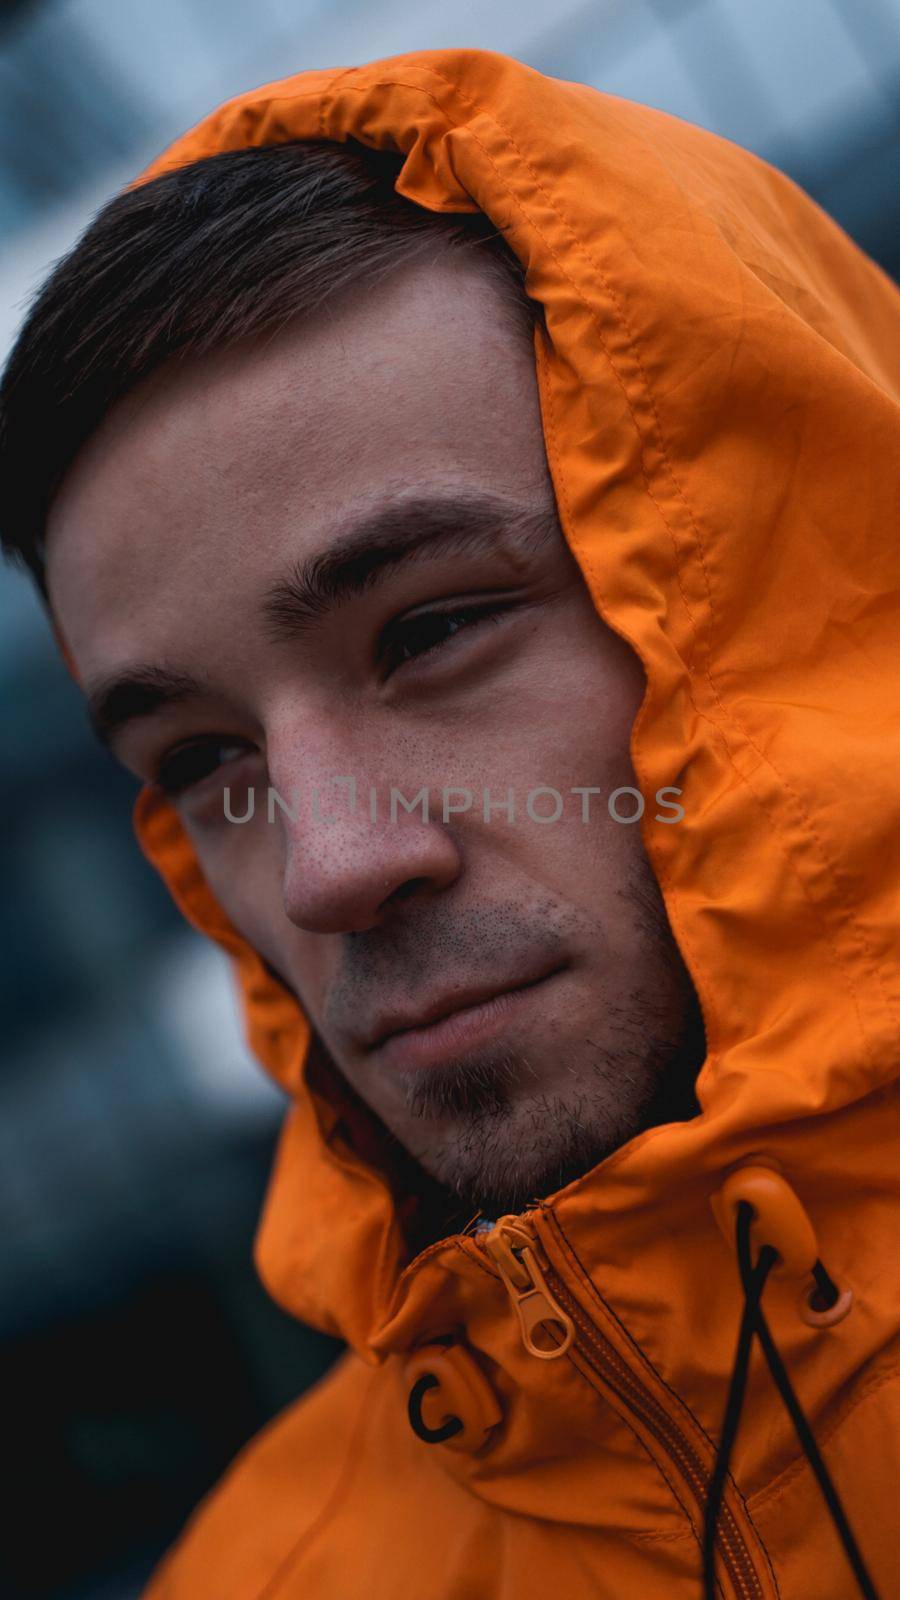 Young man in orange work uniform - glass building on background by natali_brill